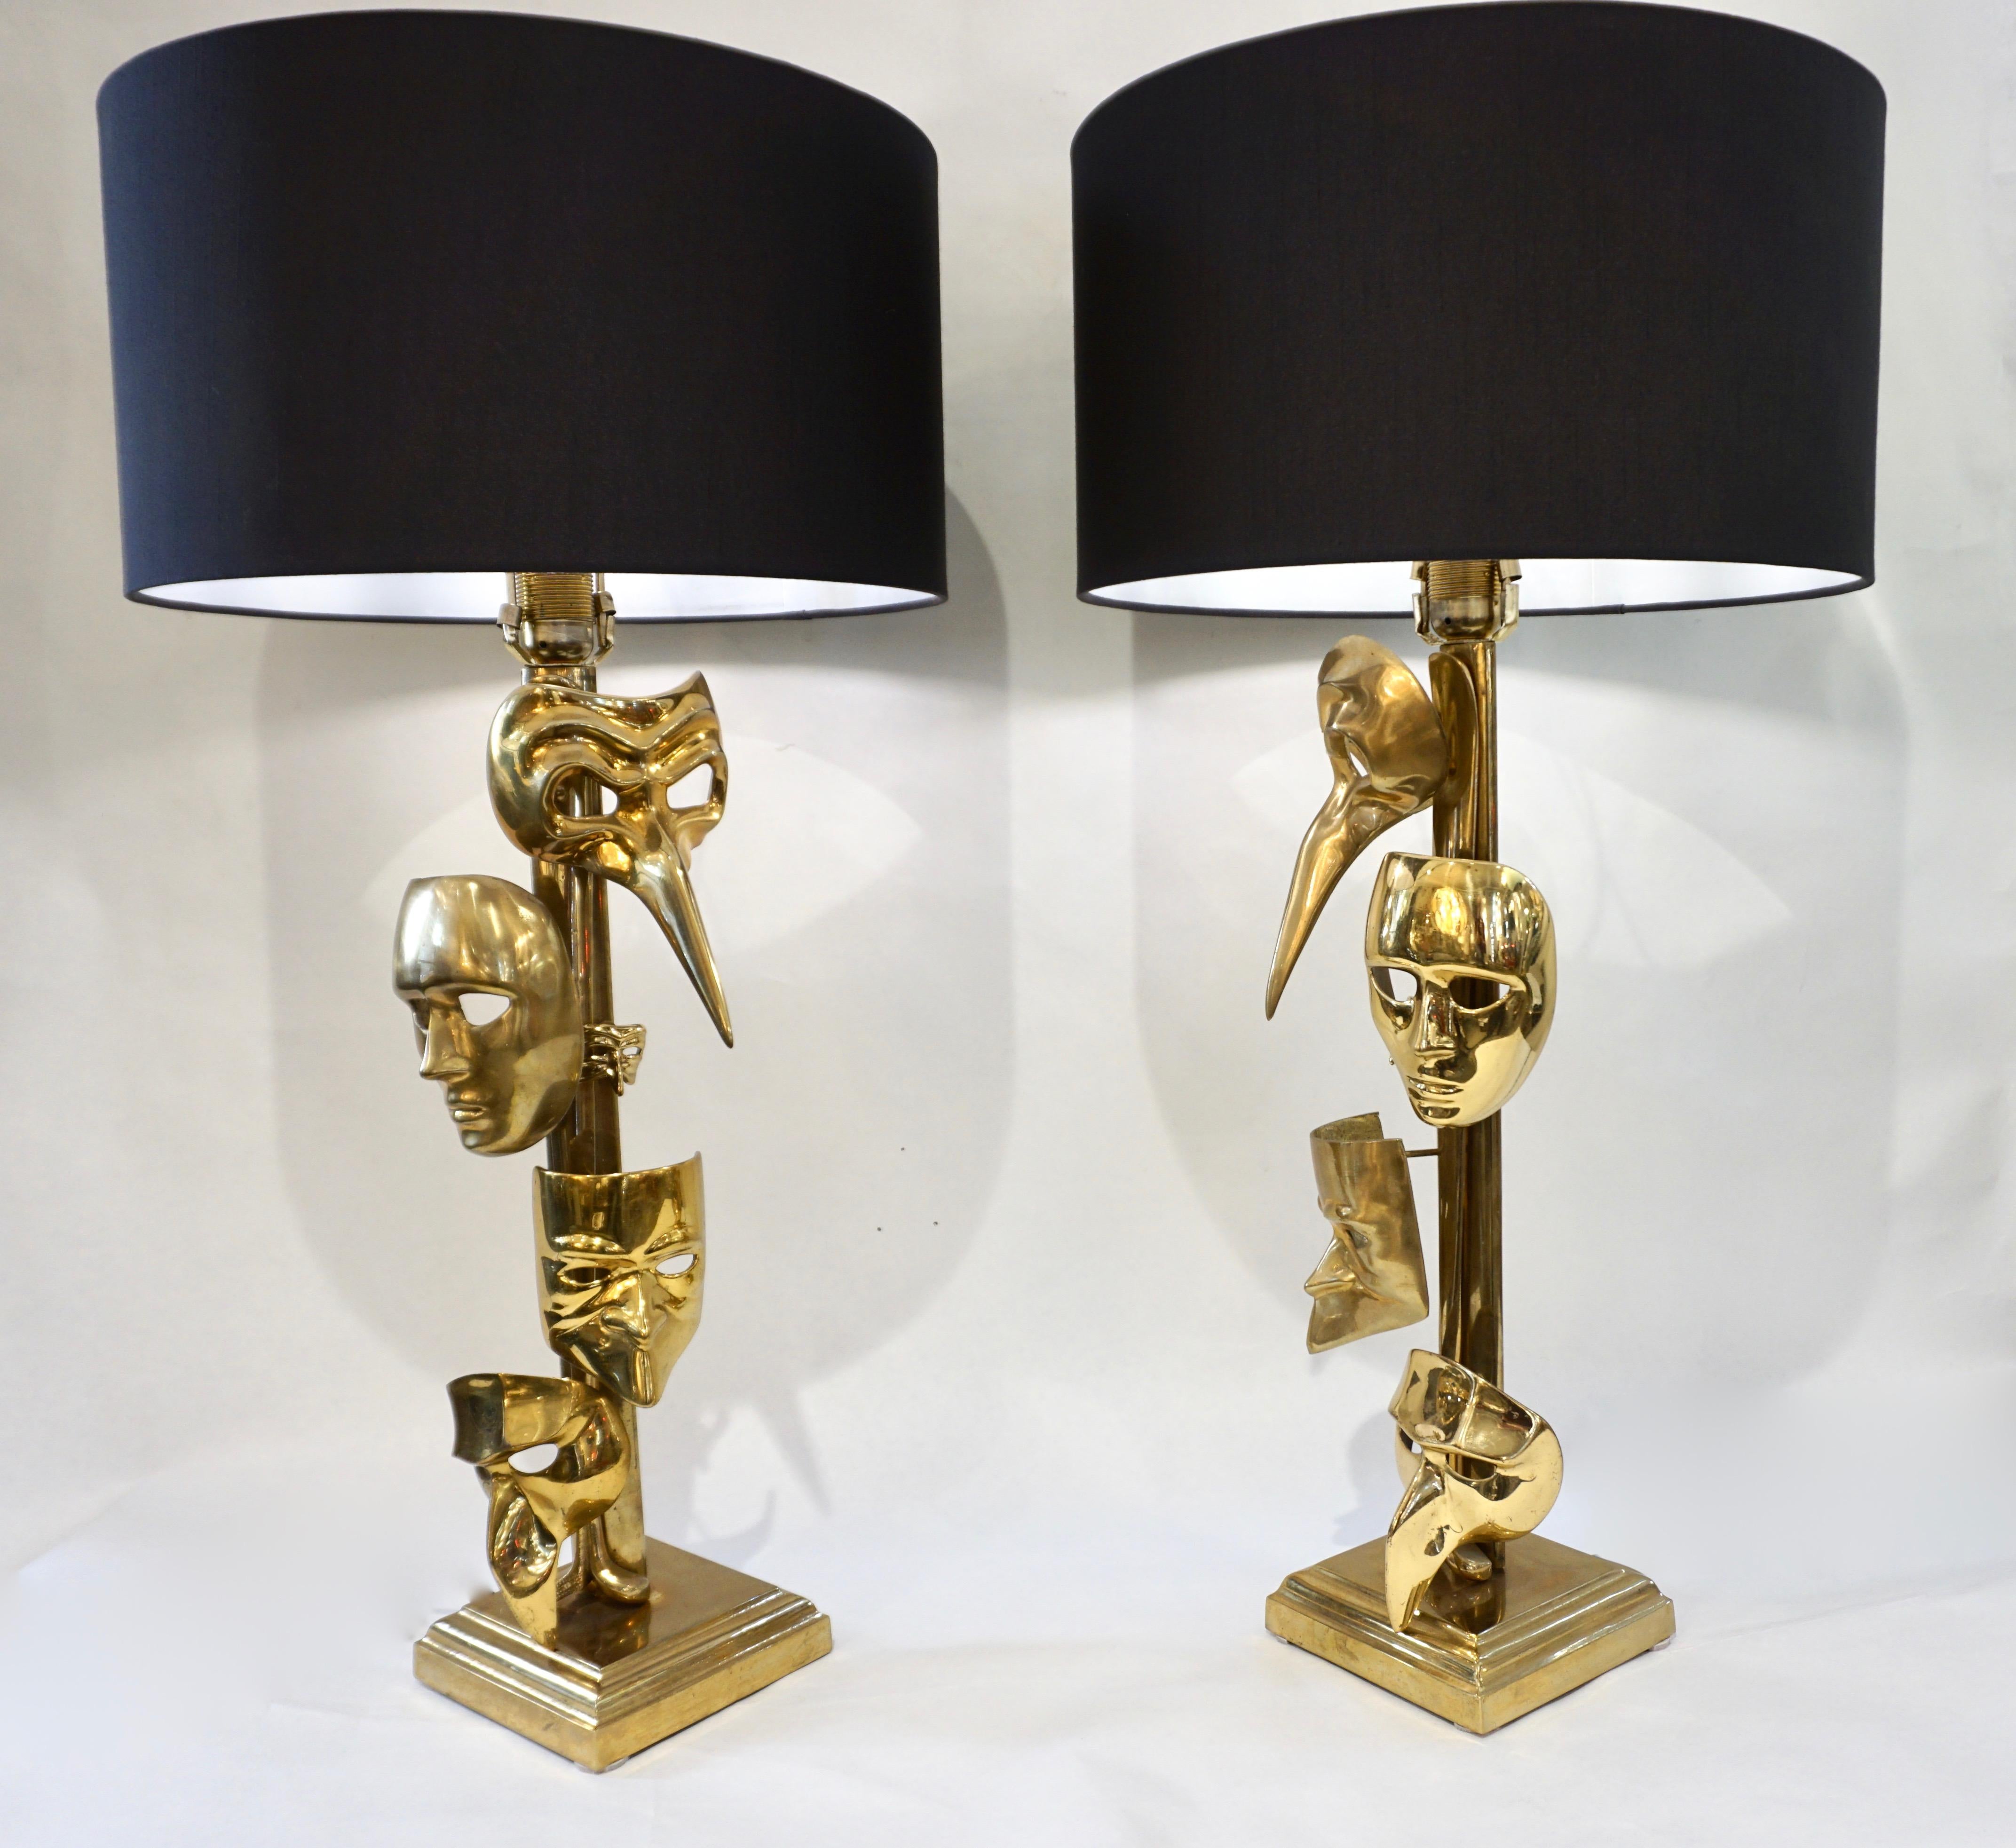 1980s vintage Italian pair of very rare lamps, entirely handmade in cast polished brass, uniquely decorated with carnival masks in different sizes, each different from the other, raised on a handcrafted square stepped brass base. Fitted with black